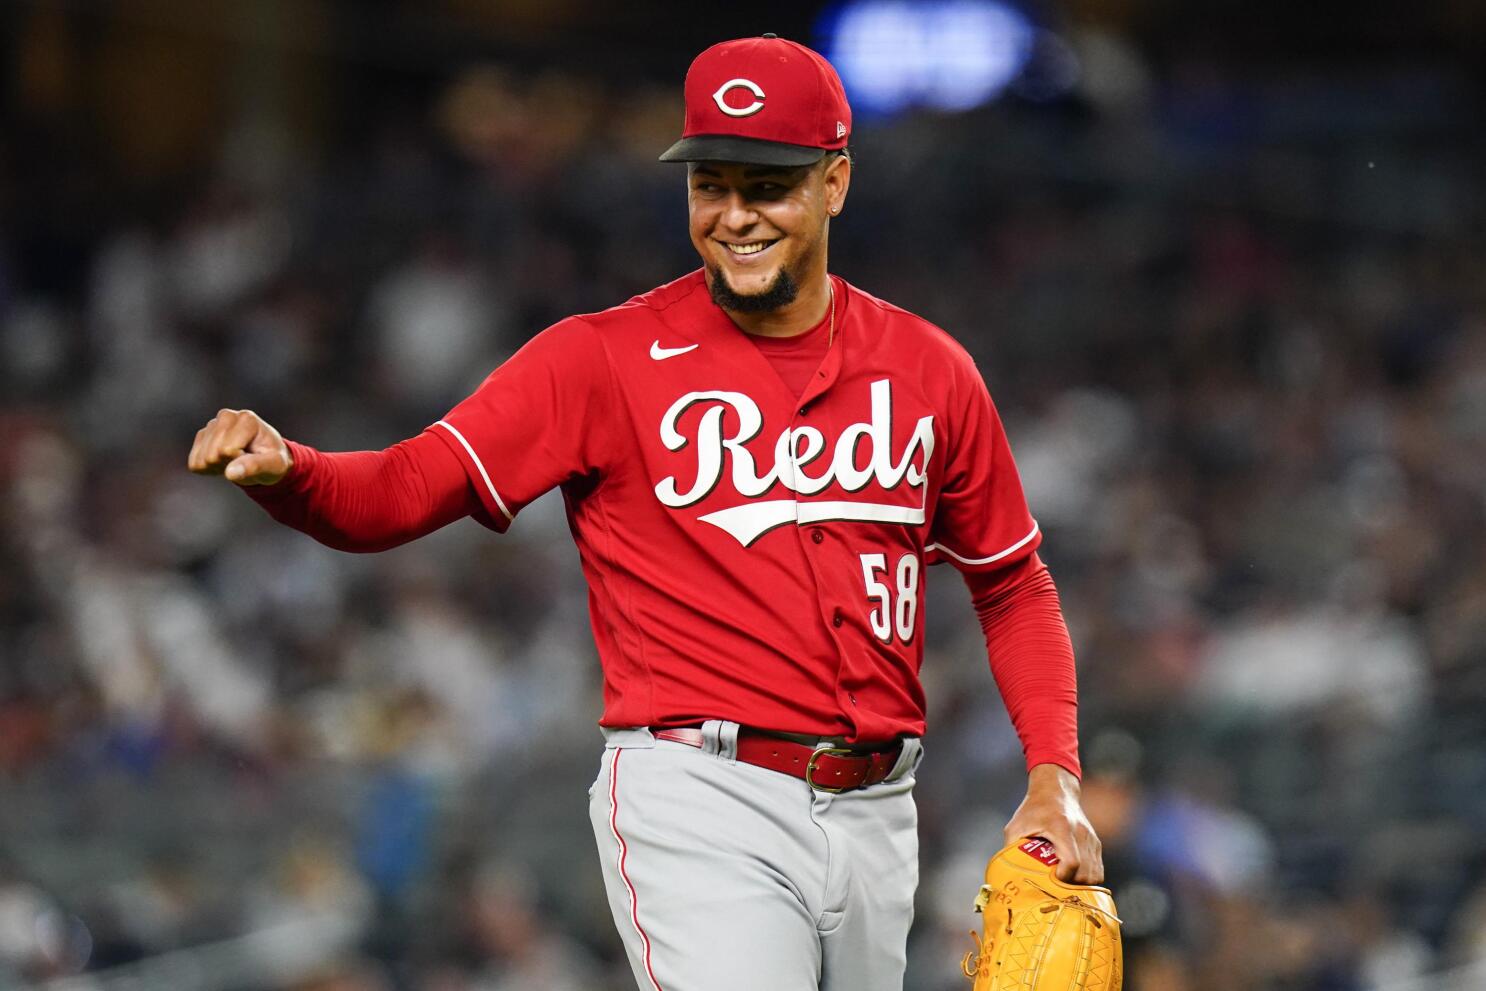 MLB Draft - How to watch the Cincinnati Reds help (or destroy